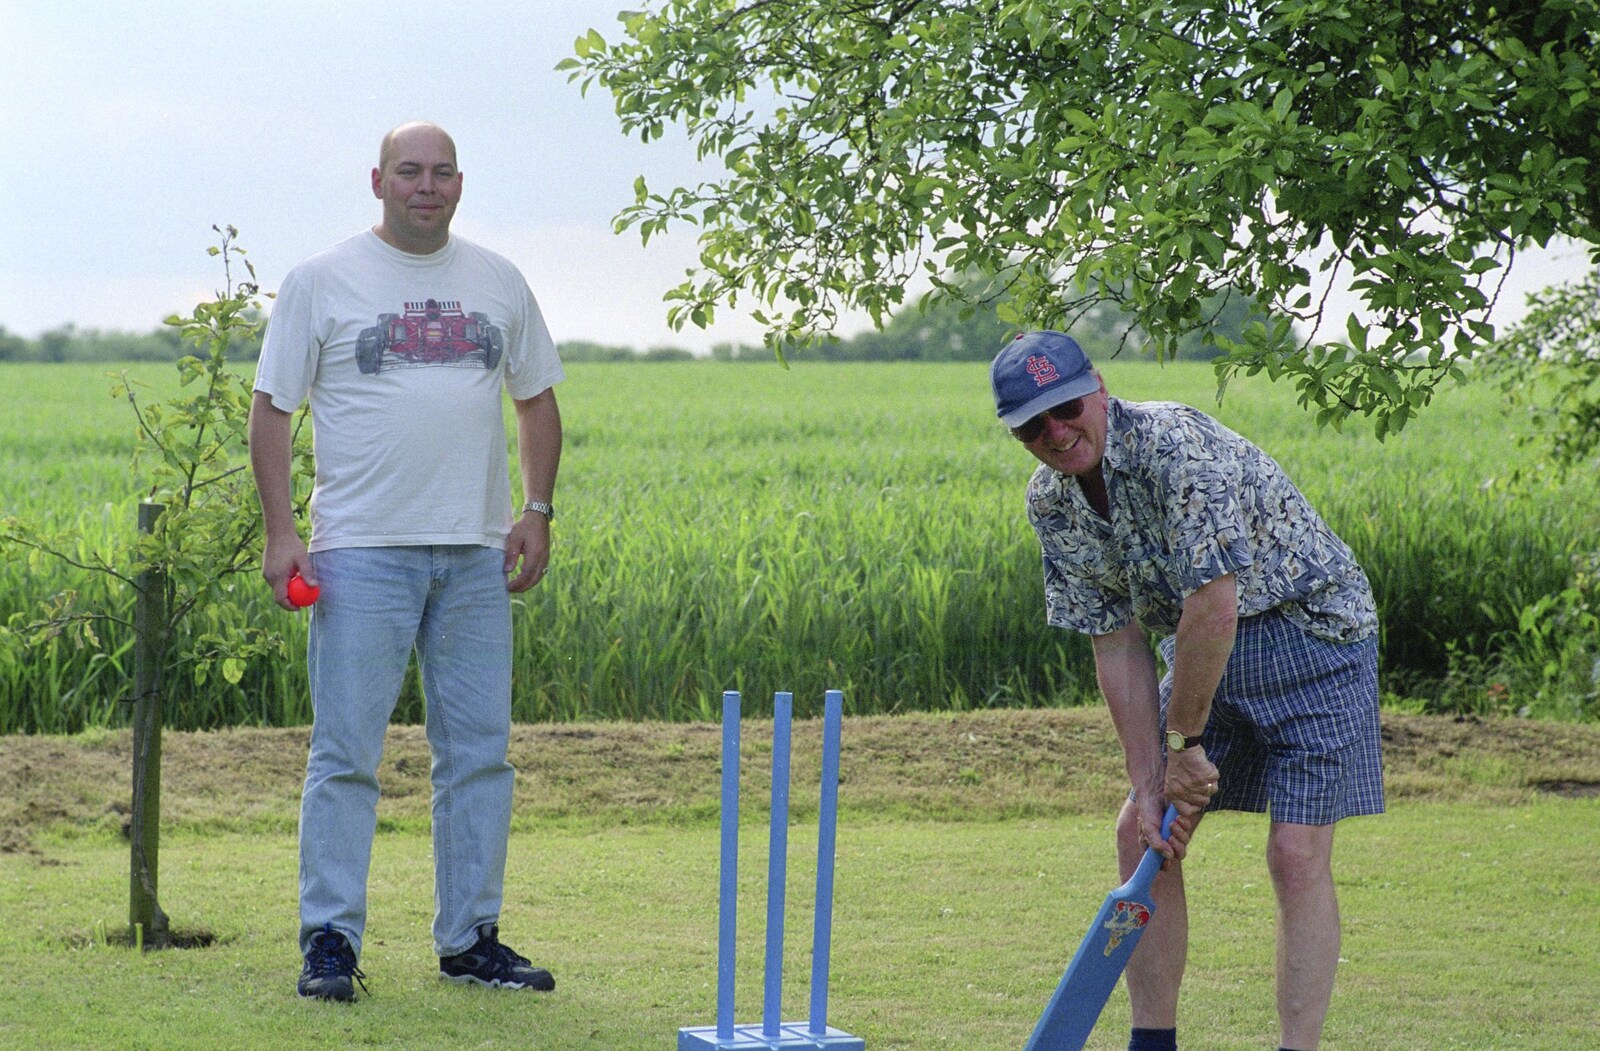 John Willy in bat, Dougie is wicket keeper from Colin and Jill's Barbeque, Suffolk - 28th May 2000